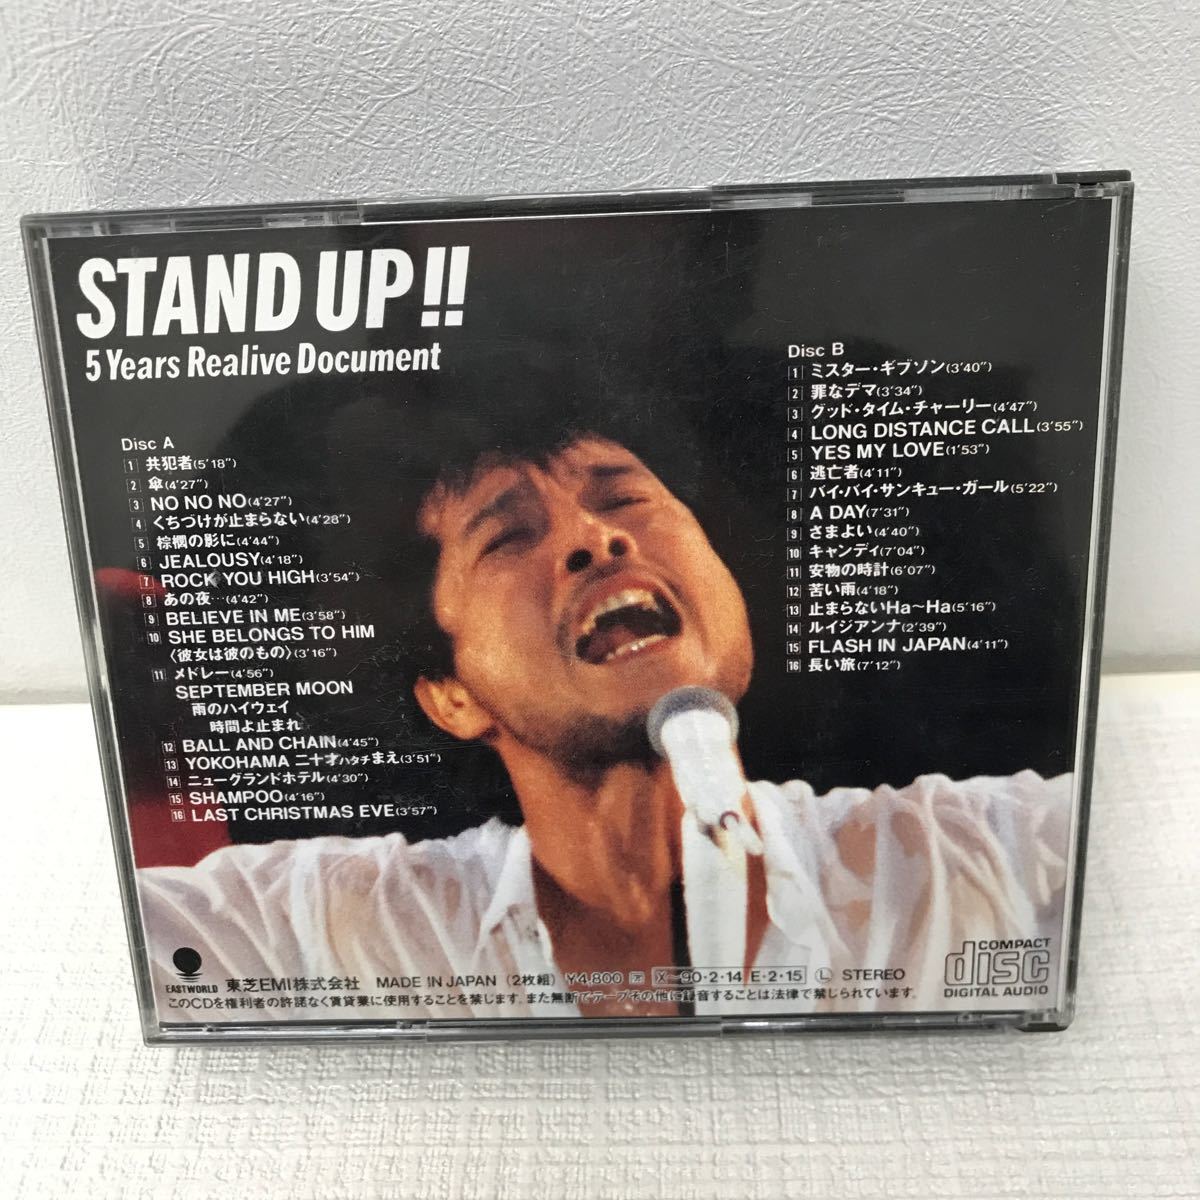 I1213H3 矢沢永吉 STAND UP!! 5Years Realive Document CD 2枚組 音楽 邦楽 東芝EMI / ミスター・ギブソン / さまよい / A DAY 他_画像2